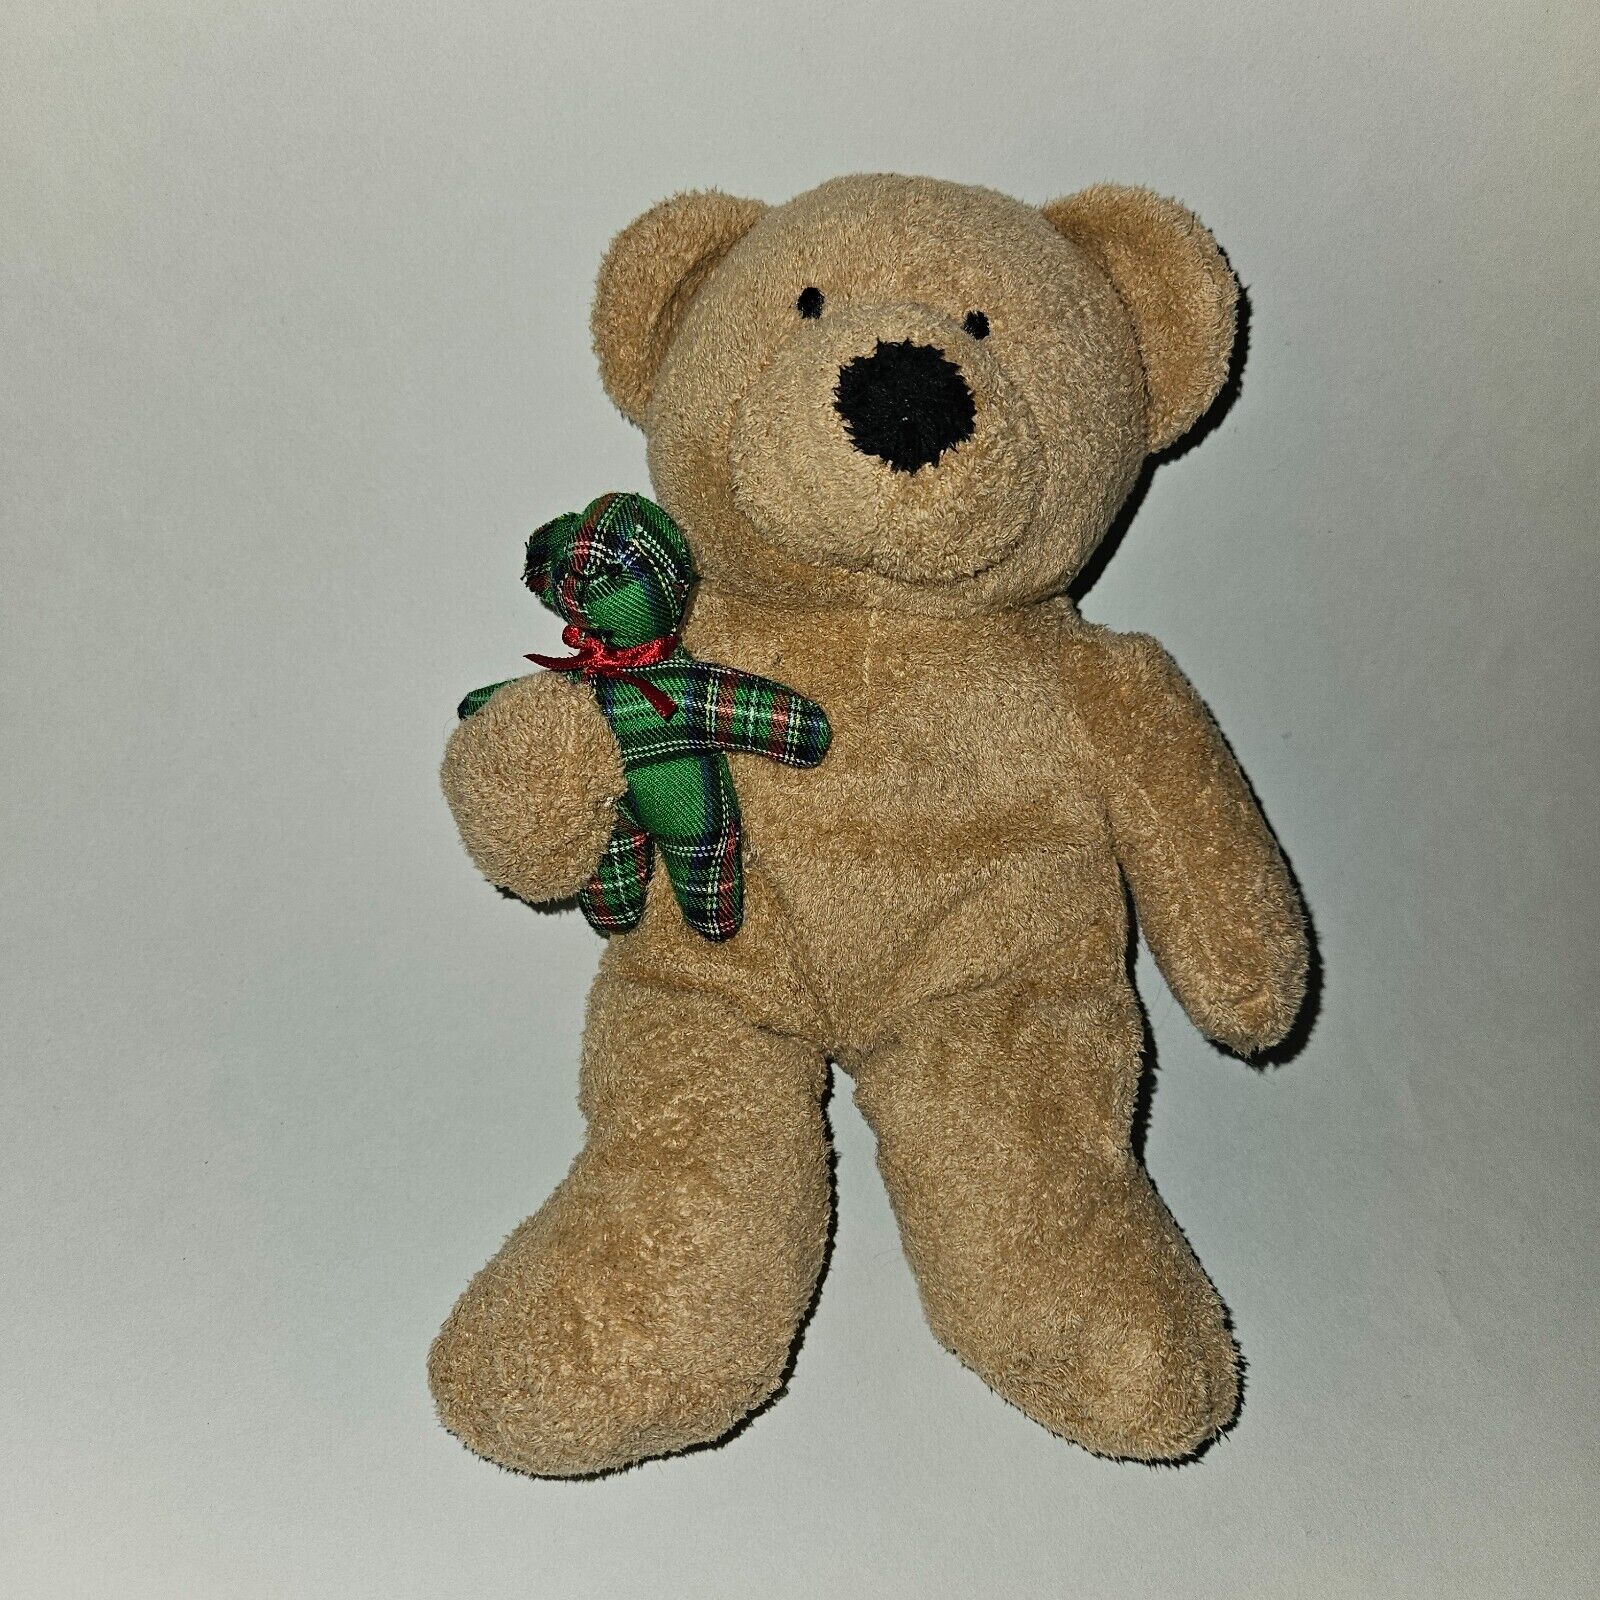 TY Pluffies Beary Merry Brown Green Teddy Bear Plush Bean Bag Stuffed Toy 2005 - $9.85